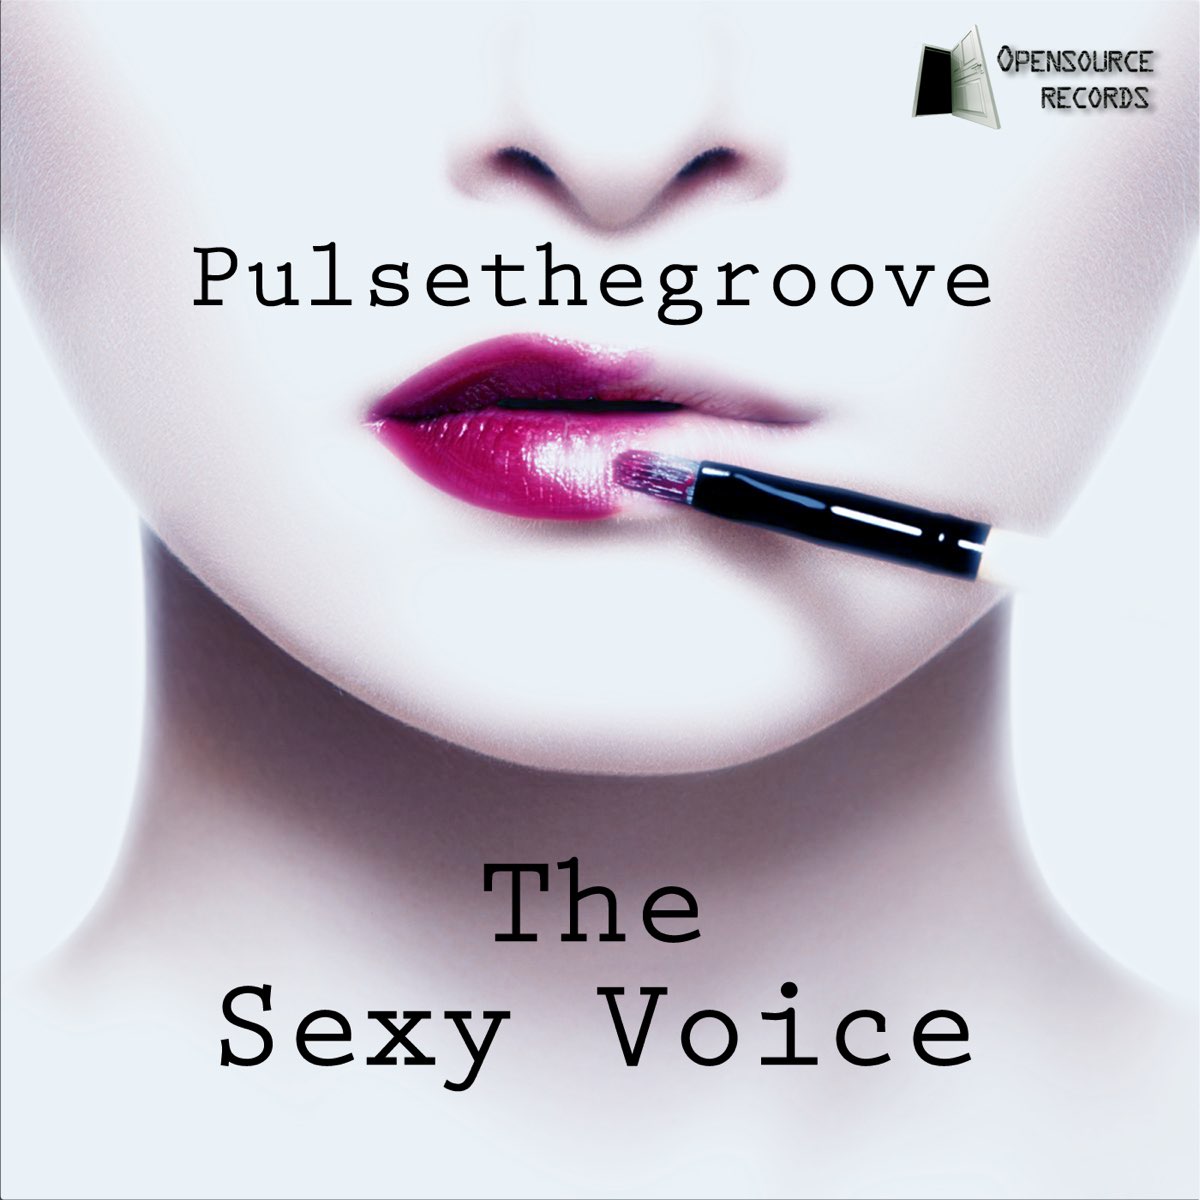 The Sexy Voice - Single - Album by Pulsethegroove - Apple Music